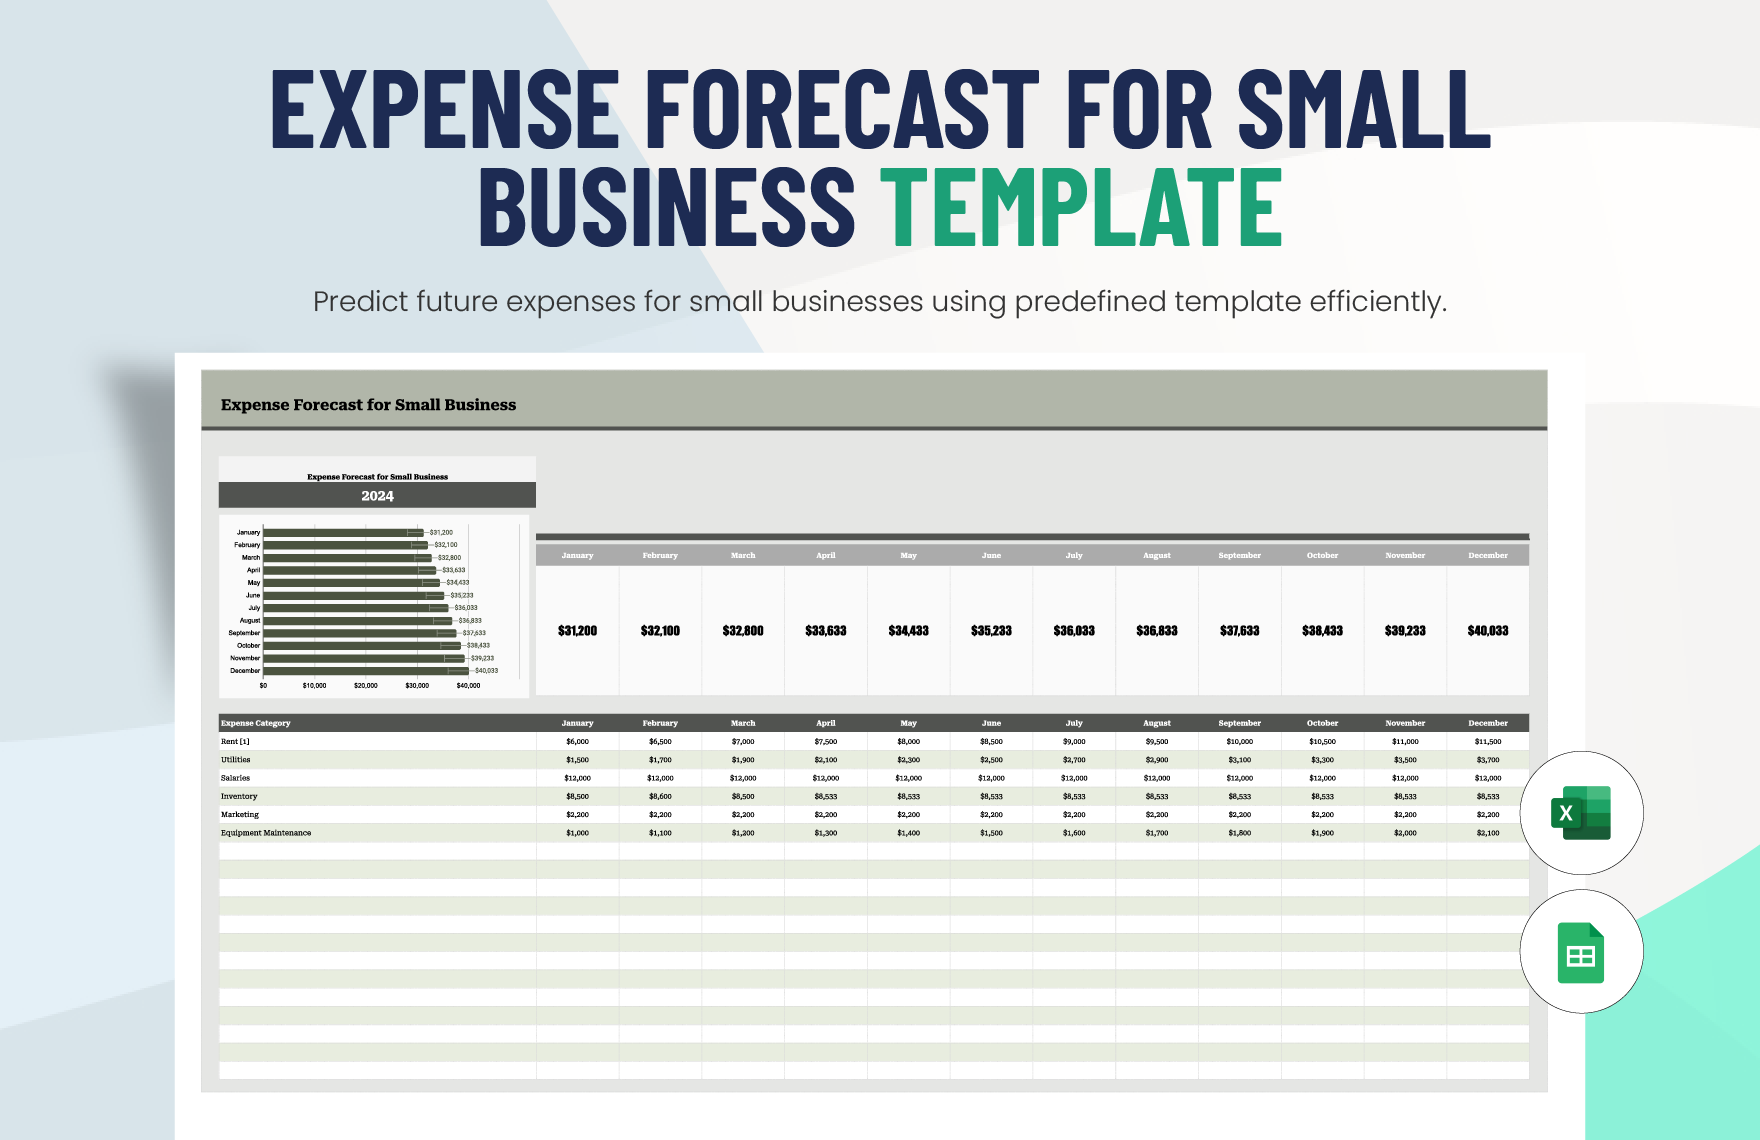 Expense Forecast for Small Business Template